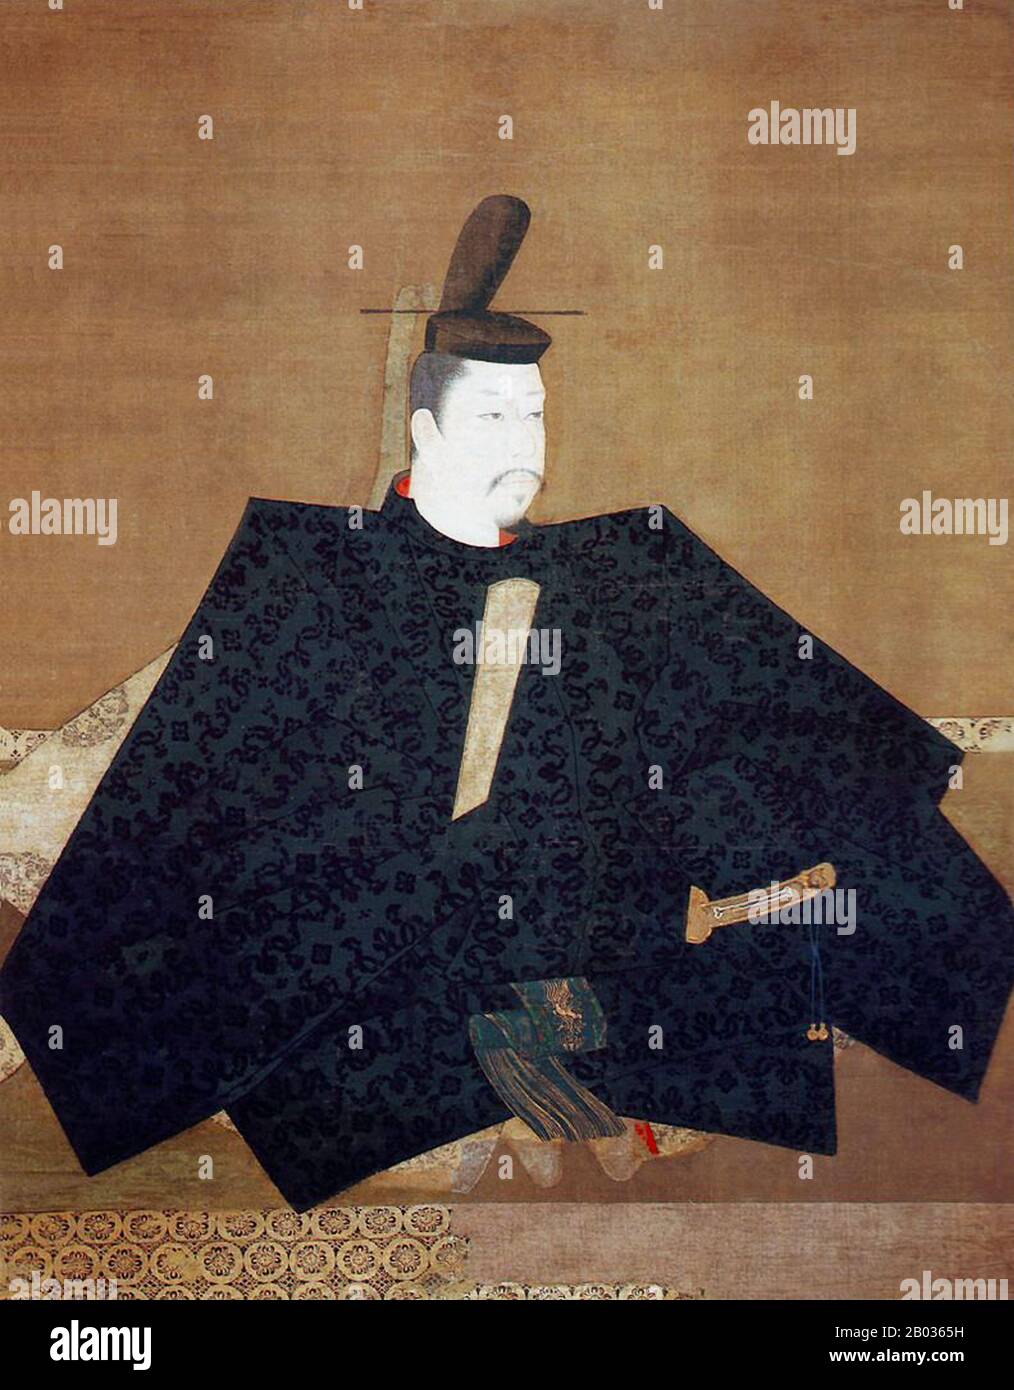 Minamoto no Yoritomo (May 9, 1147 – February 9, 1199) was the founder and the first shogun of the Kamakura Shogunate of Japan. He ruled from 1192 until 1199. Stock Photo